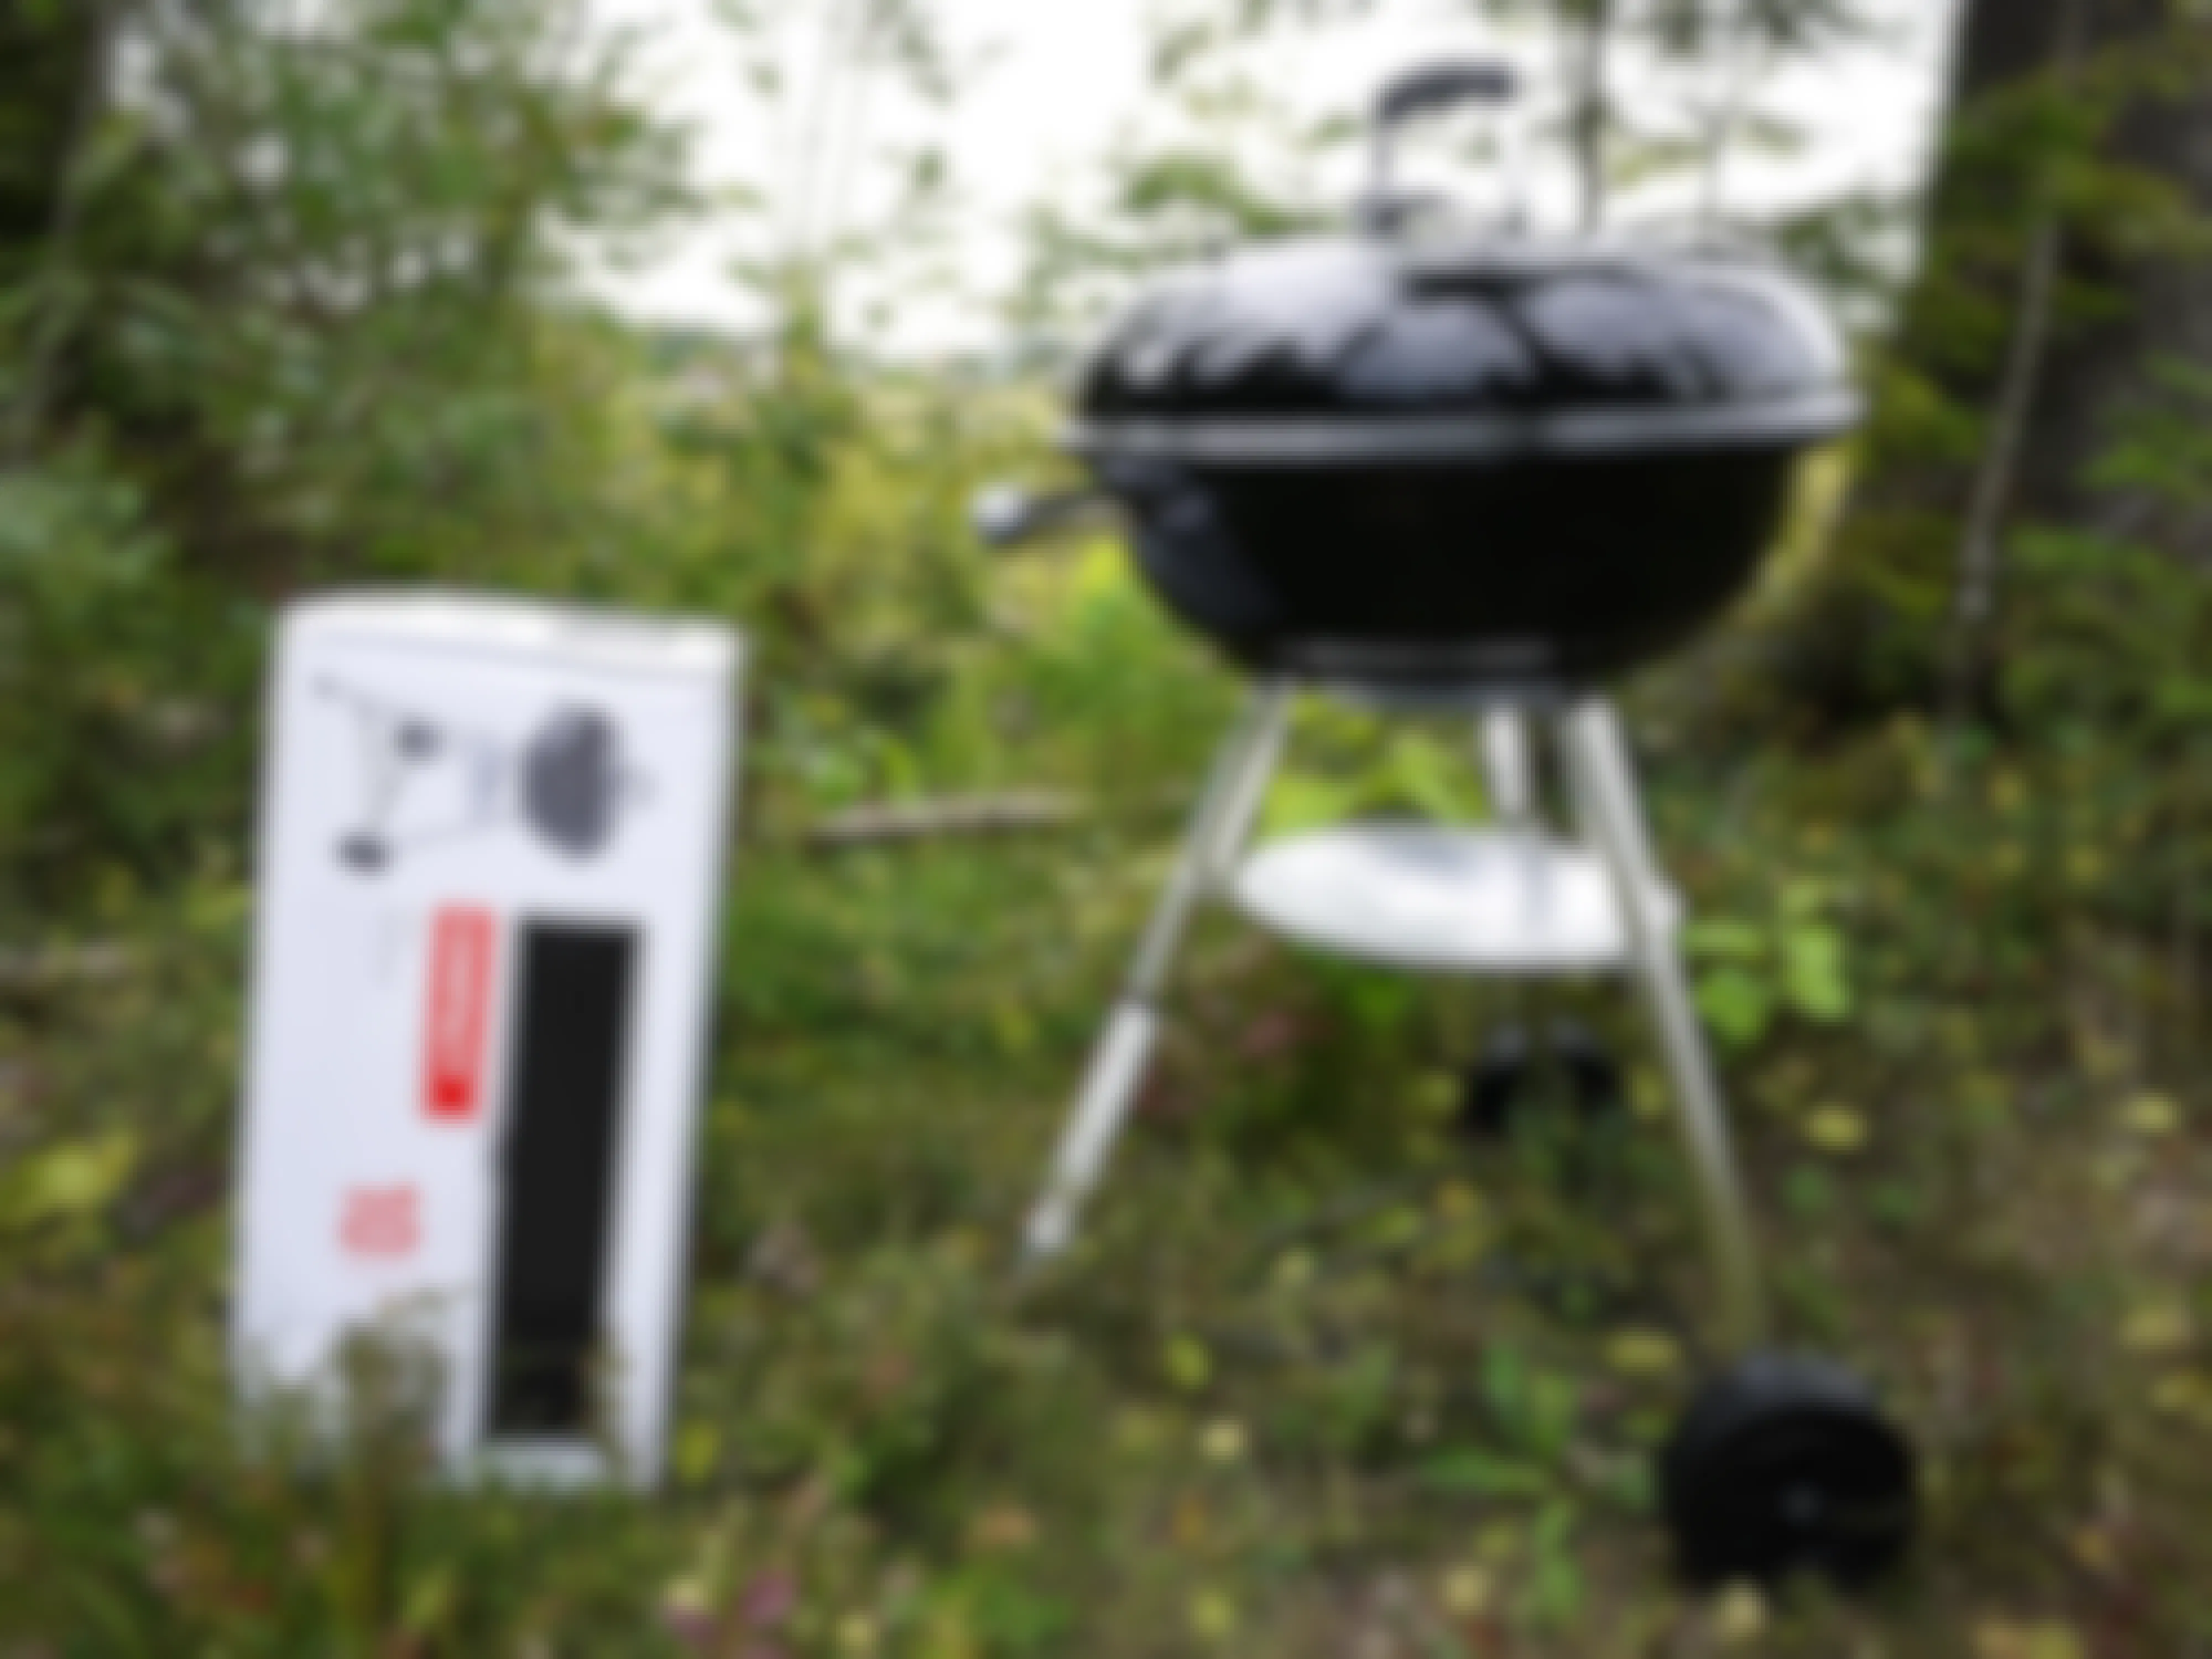 Black grill next to a box that says compact with a picture of the grill on it. The grill and box are outside surrounded by grass and trees.